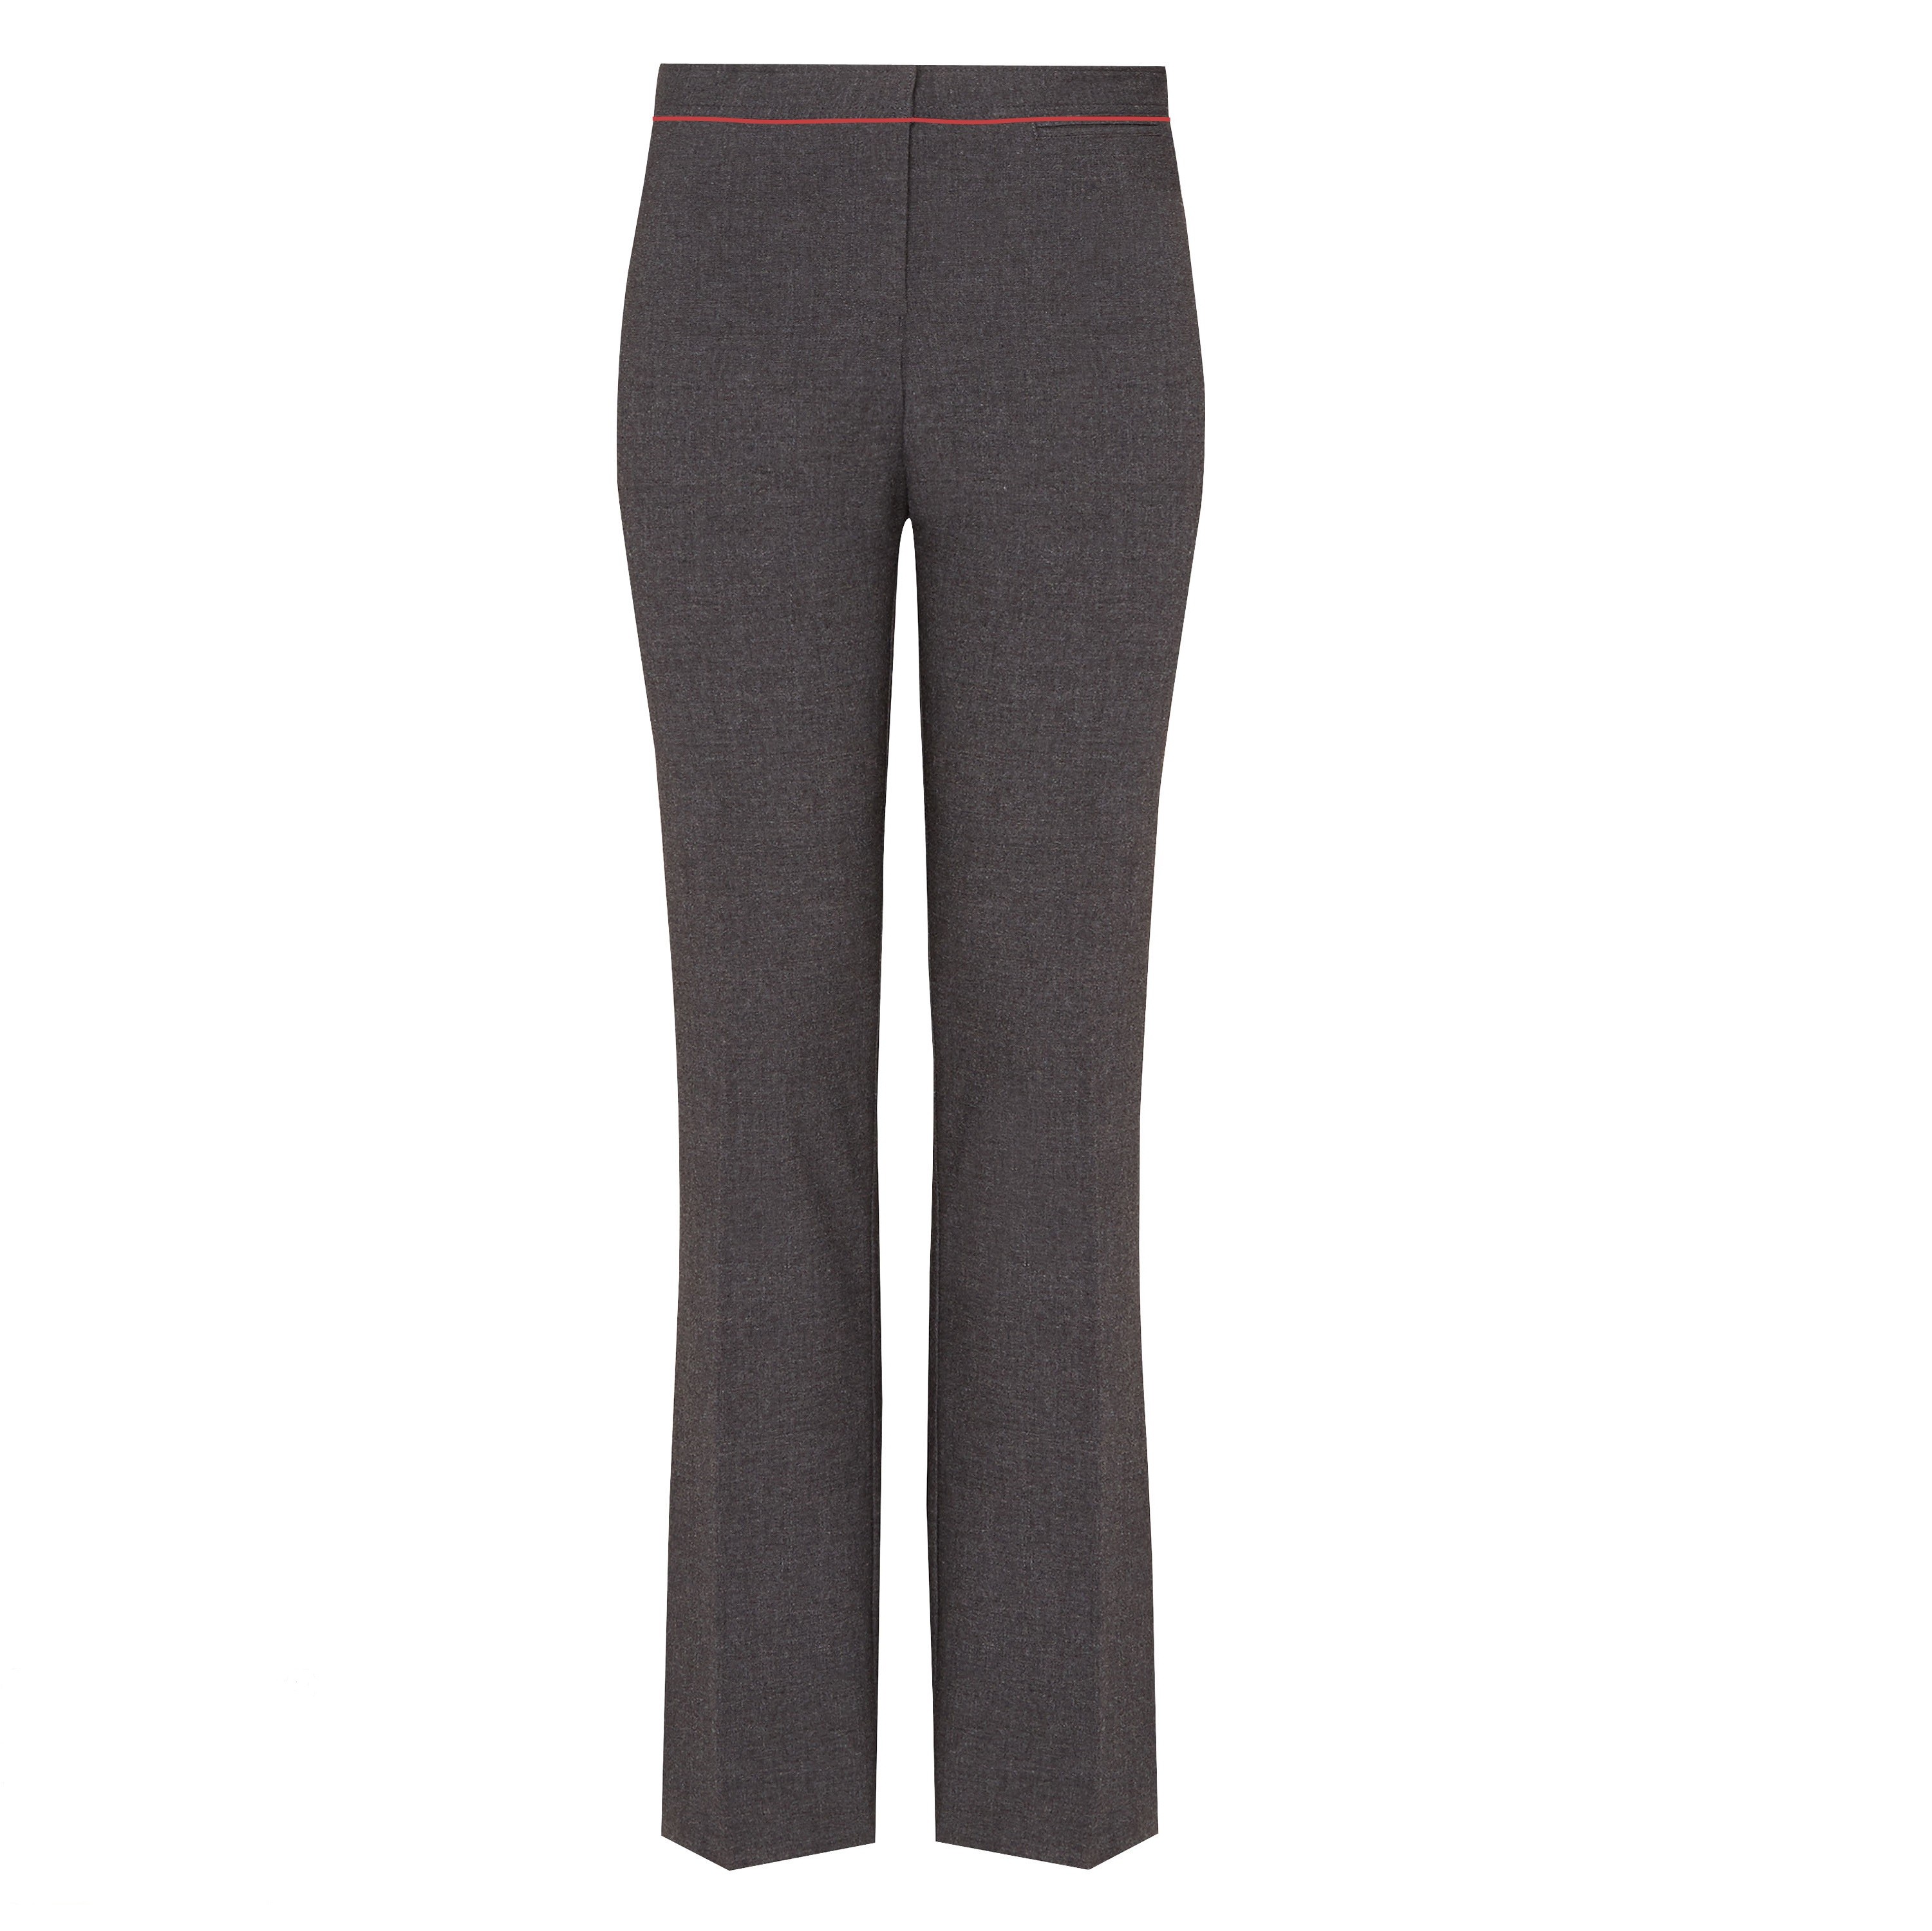 Buy Clarks Black Senior Girls School Trousers With Belt Accessory from Next  USA